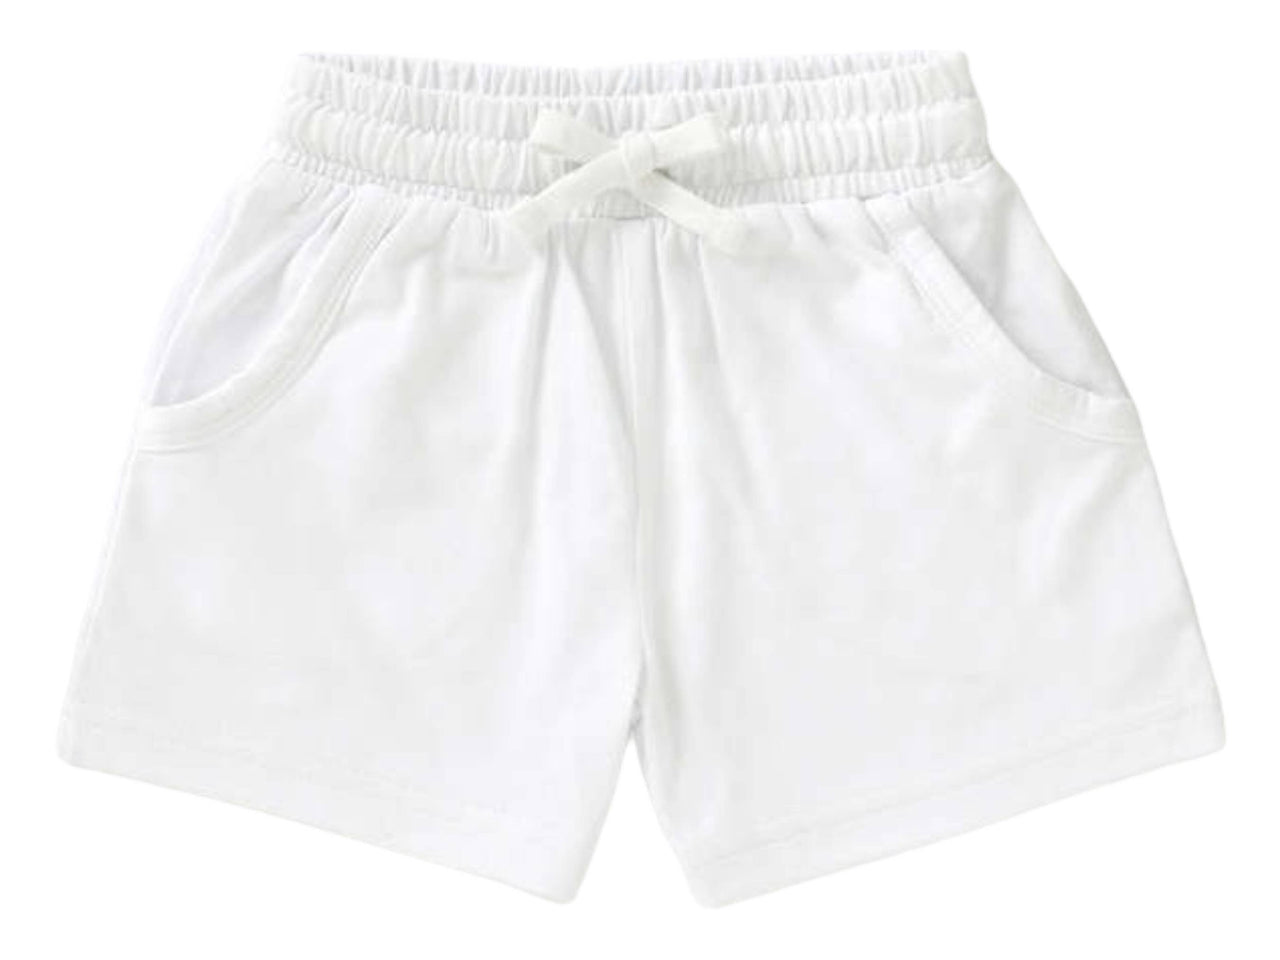 Organic Shorts with pockets relaxed minimalist style